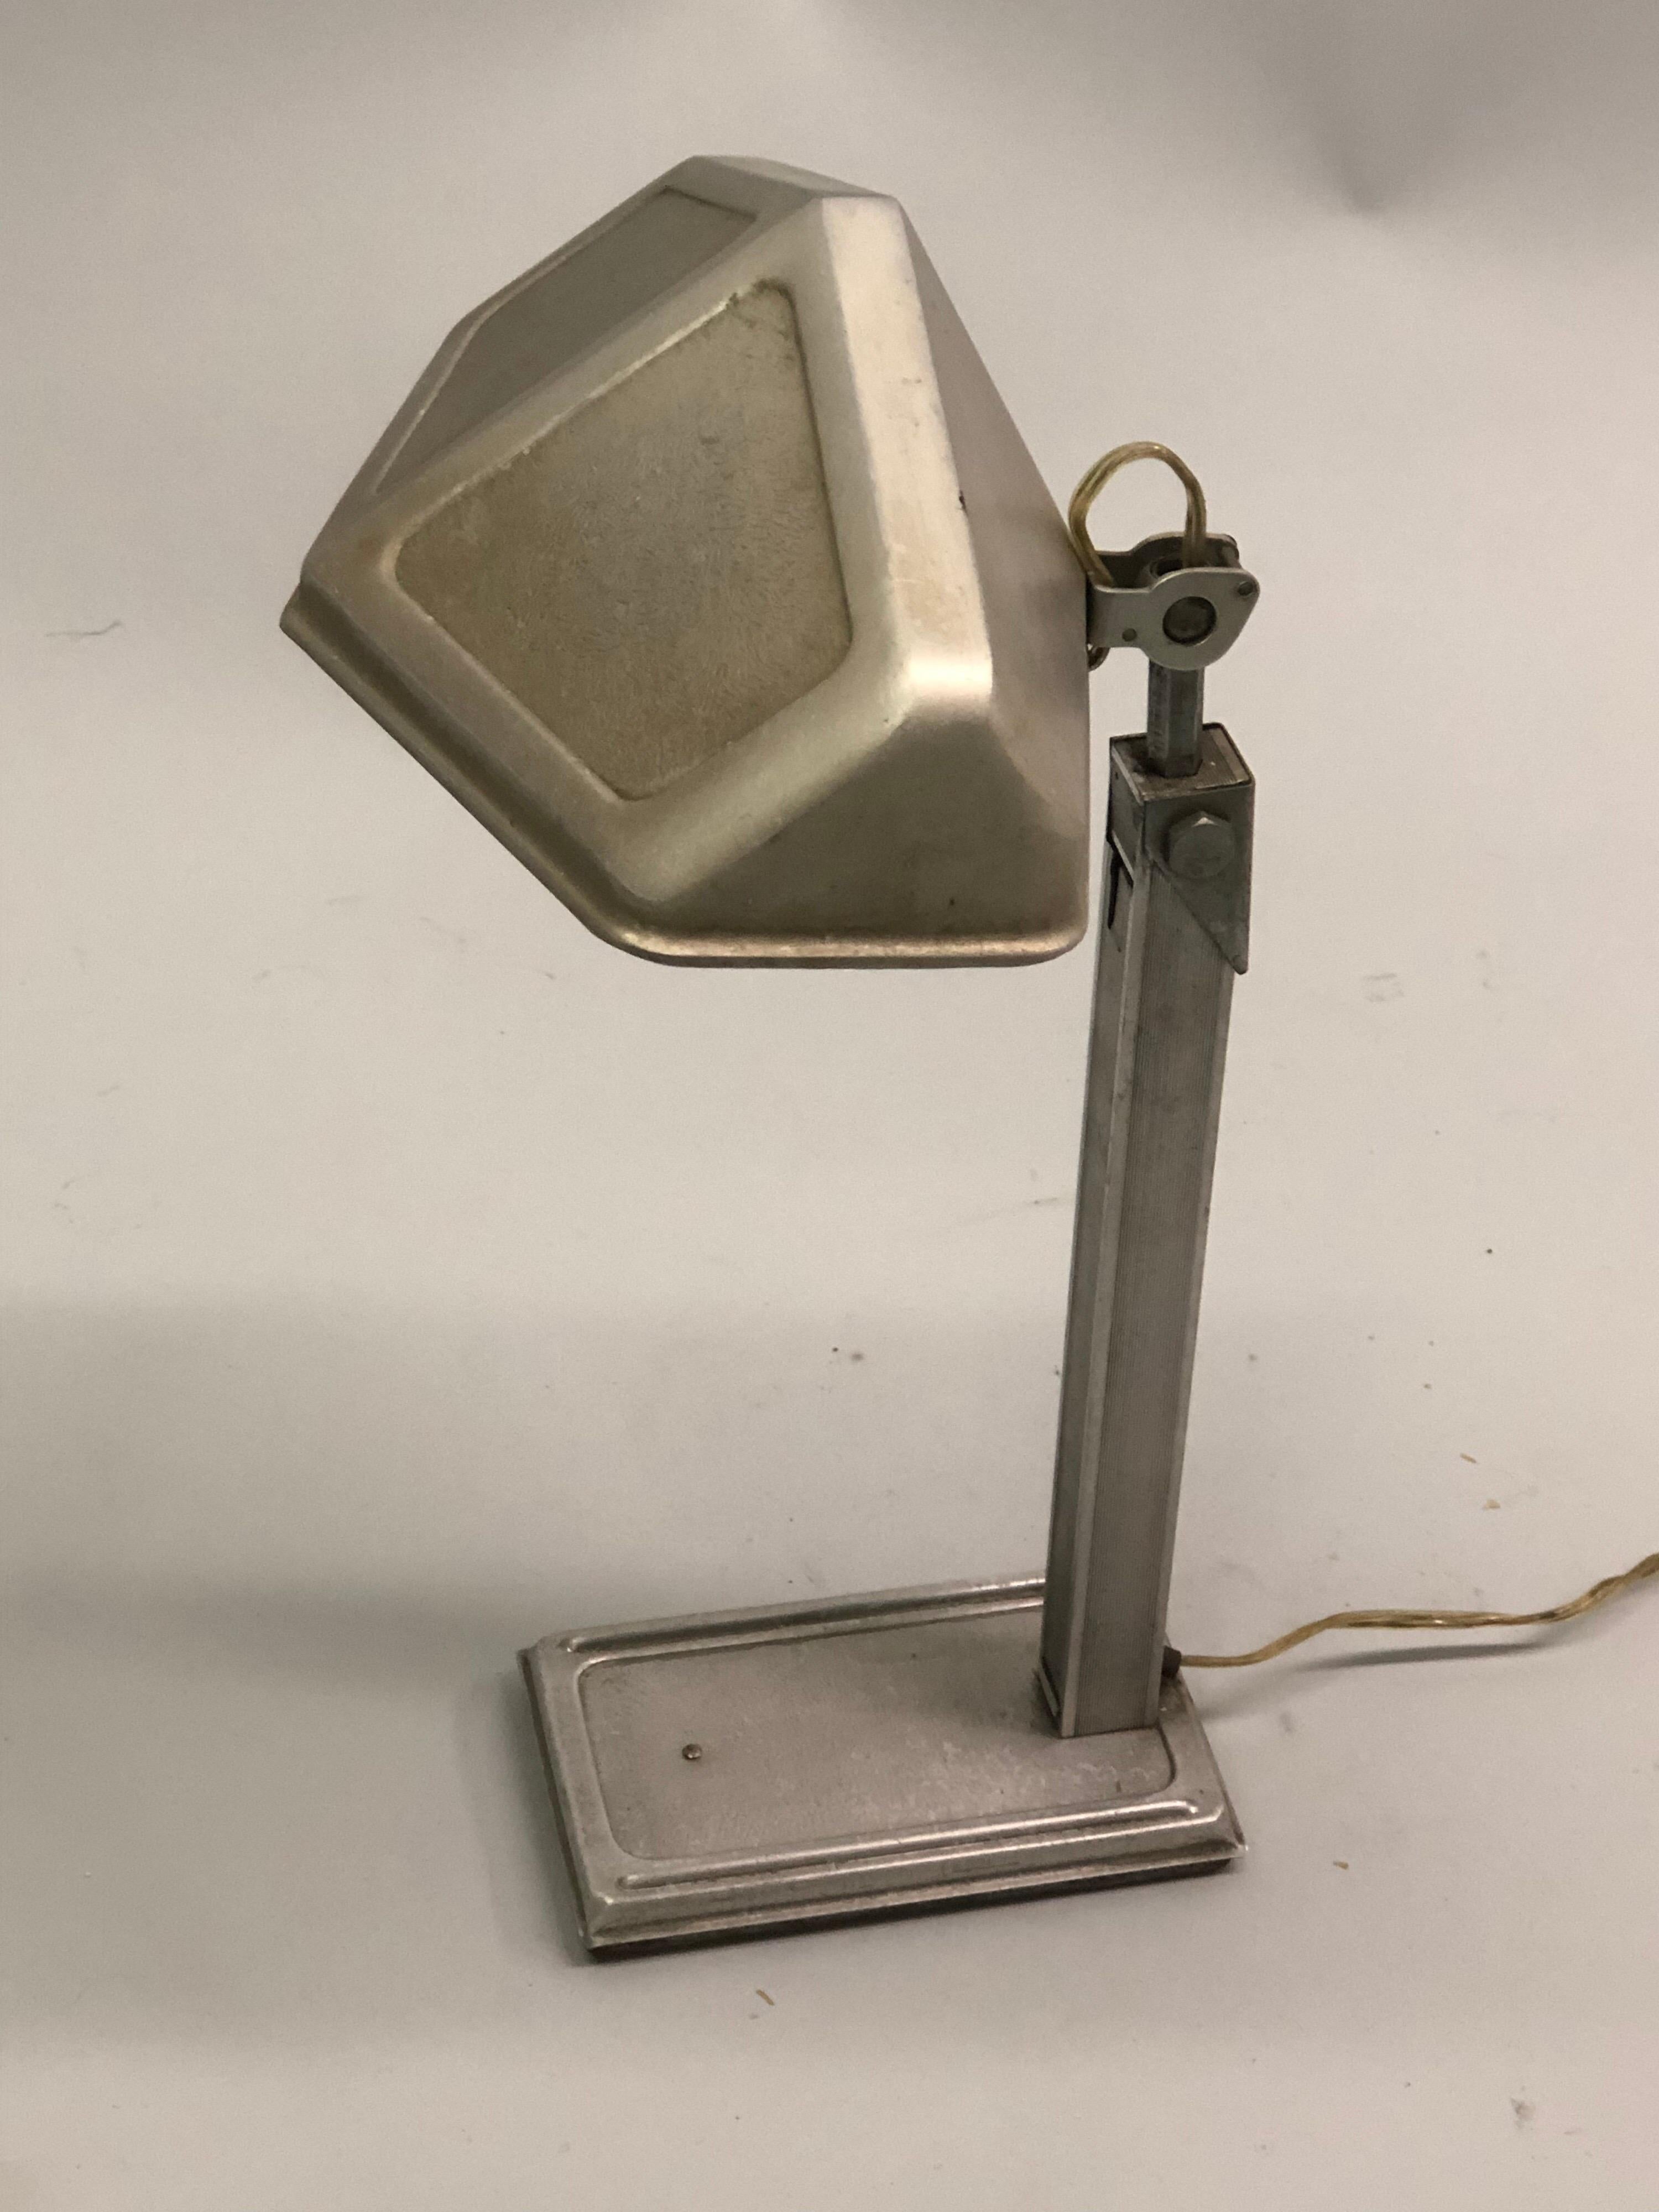 20th Century Pair of French Early Modern Adjustable Aluminum Table/Desk Lamps by Pirette 1930 For Sale